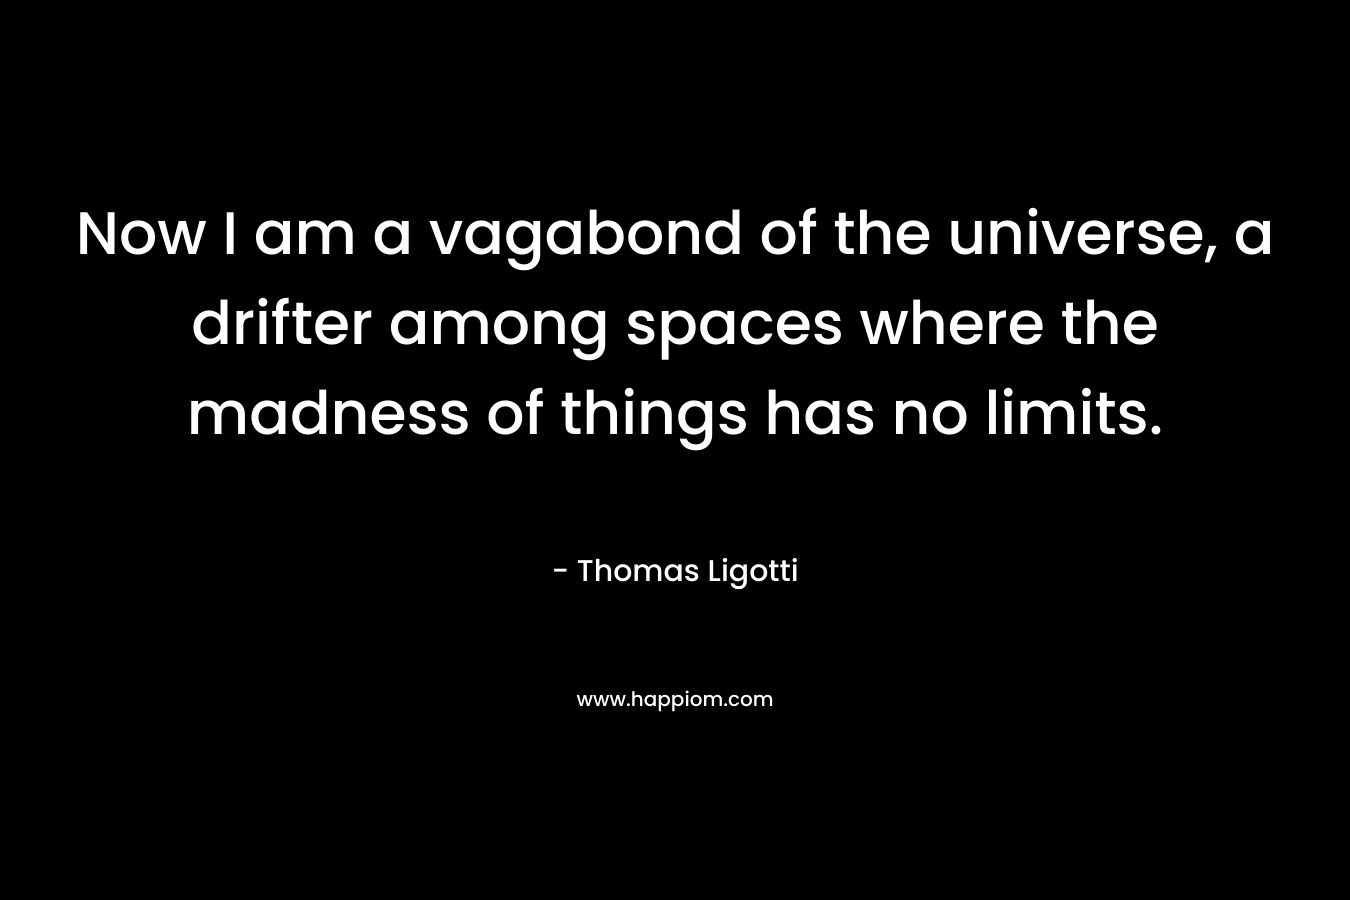 Now I am a vagabond of the universe, a drifter among spaces where the madness of things has no limits.